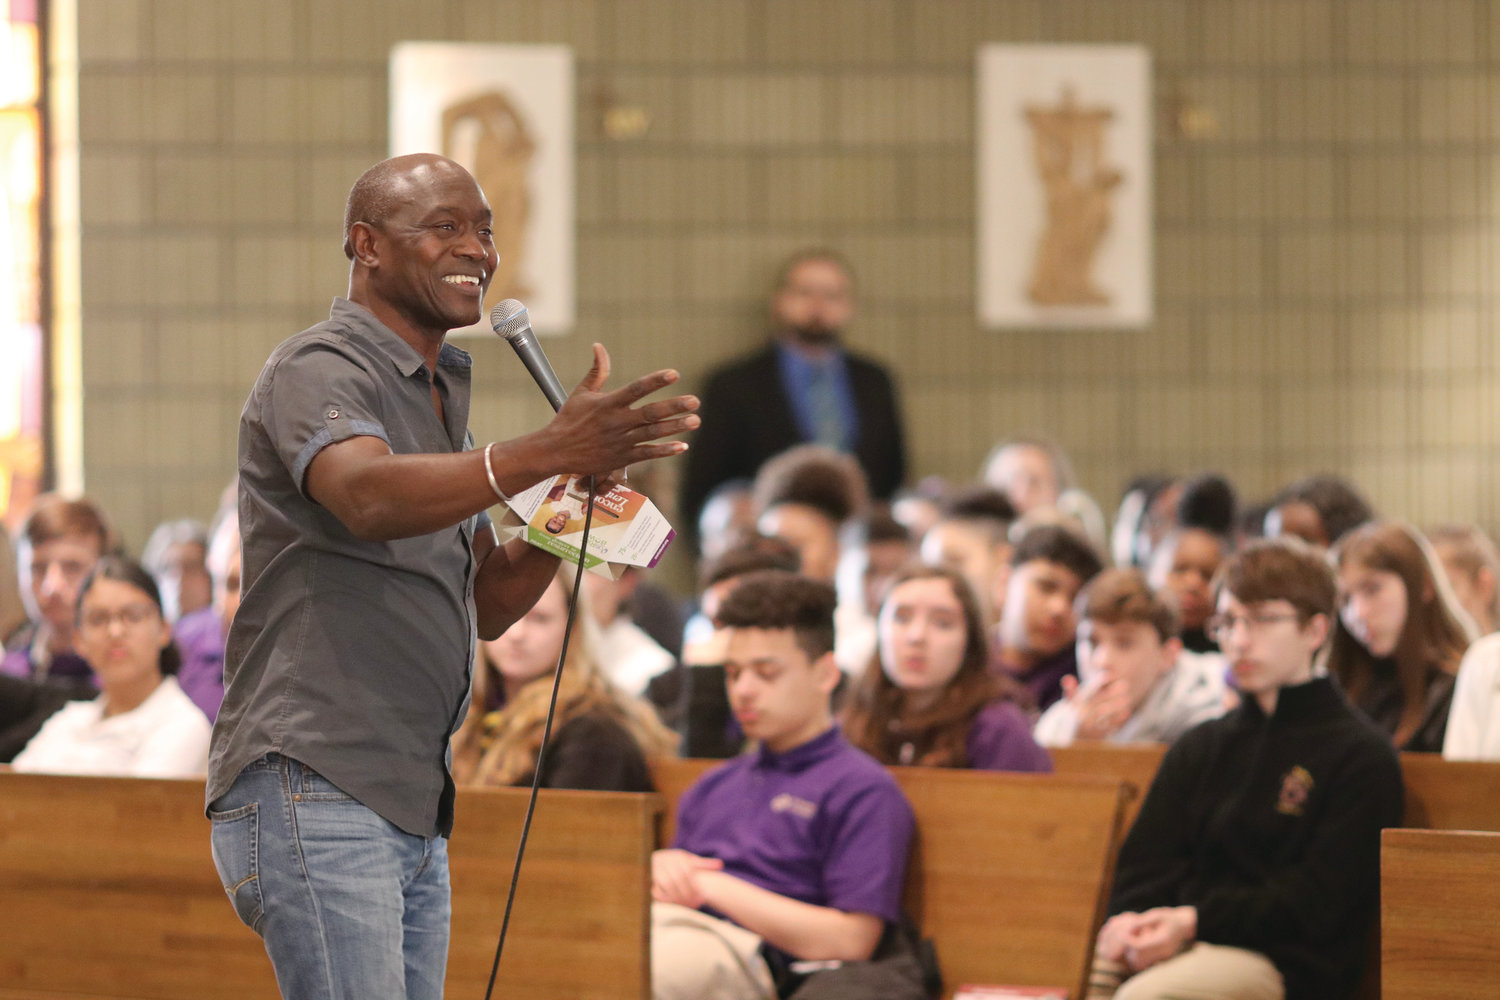 Thomas Awiapo speaks to students at St. Raphael Academy about his experiences growing up as an orphan in Ghana in which he was rescued from extreme hunger through his participation in an education initiative sponsored through the CRS Rice Bowl program.